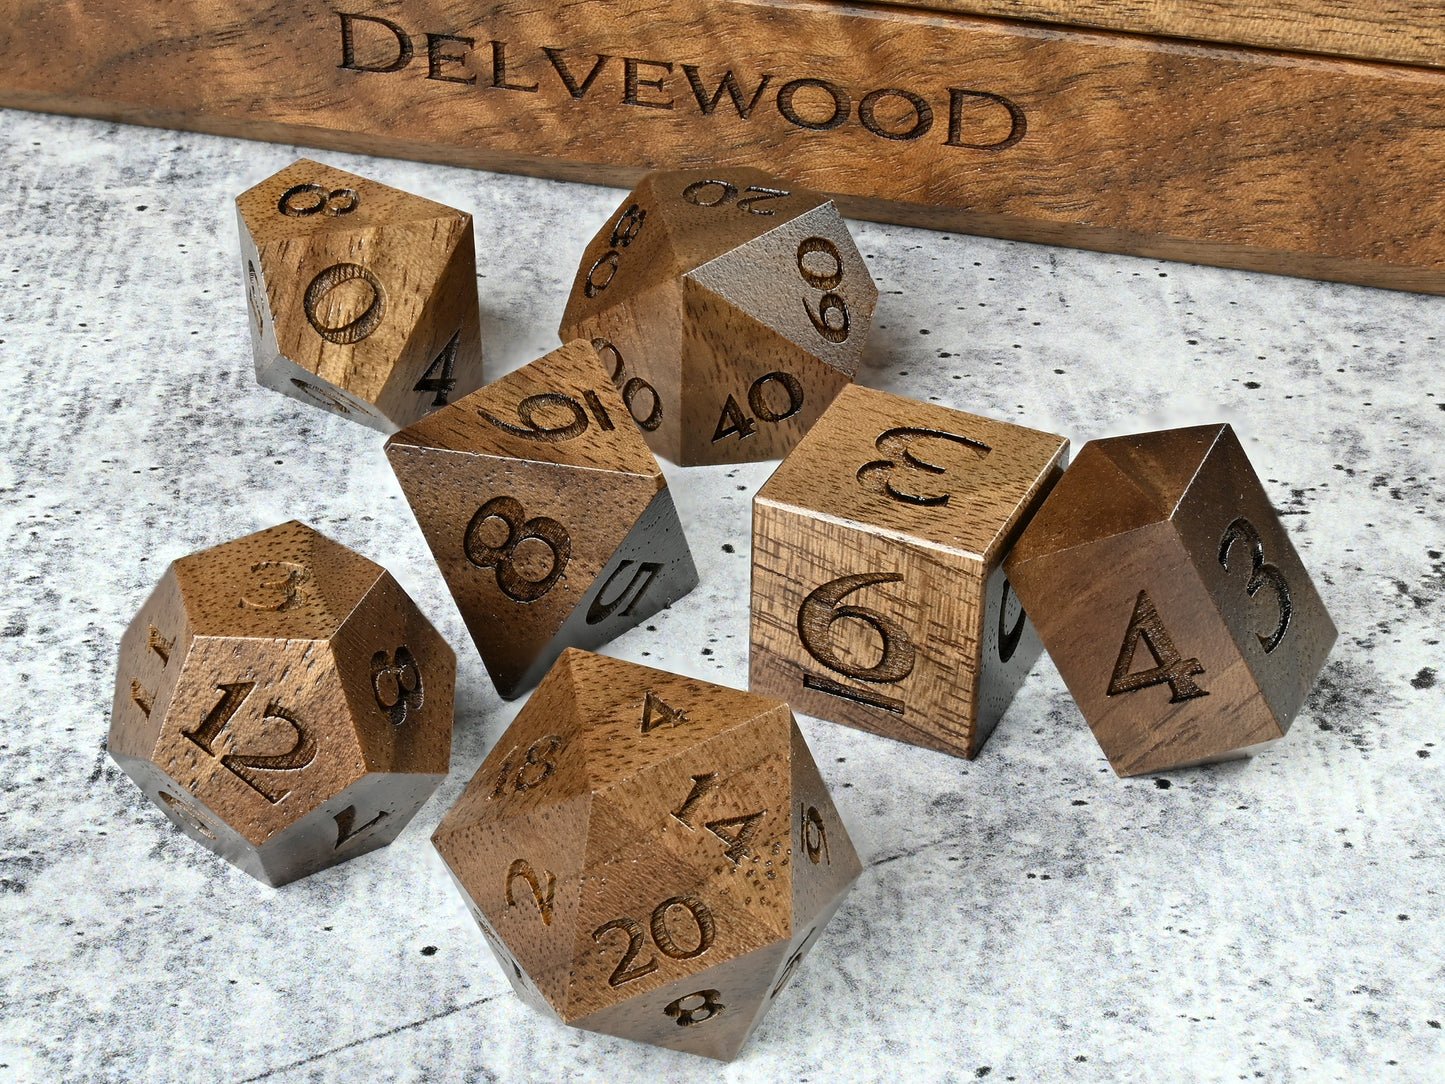 Walnut wood dice set for dnd rpg tabletop gaming in front of Delvewood delver's kit dice box.